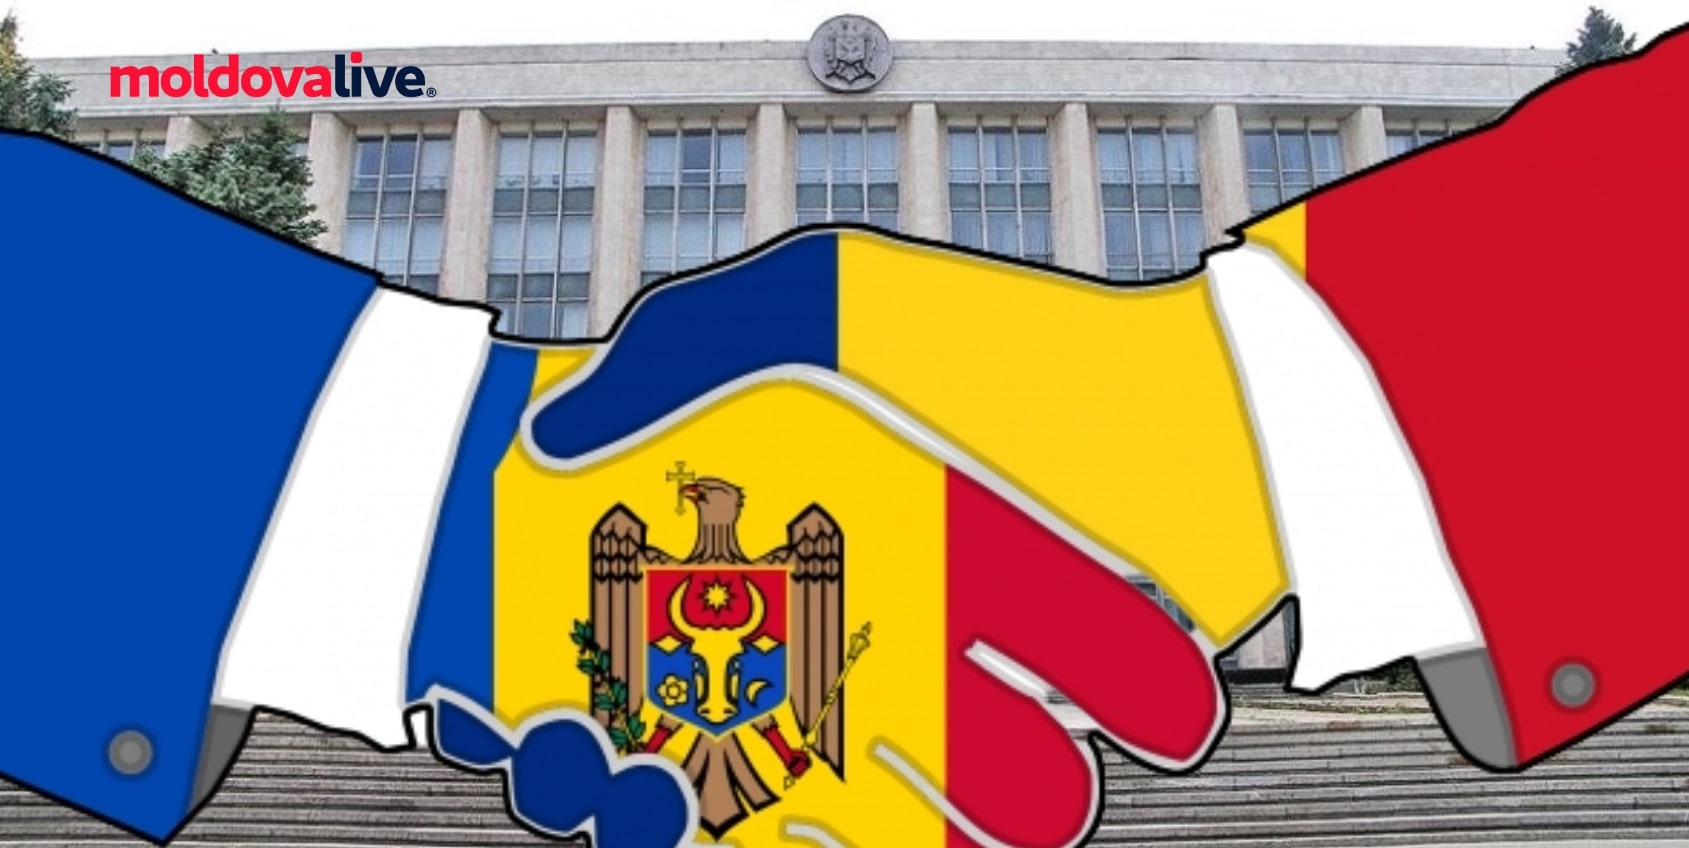 The Republic of Moldova and Romania will hold several joint sports events